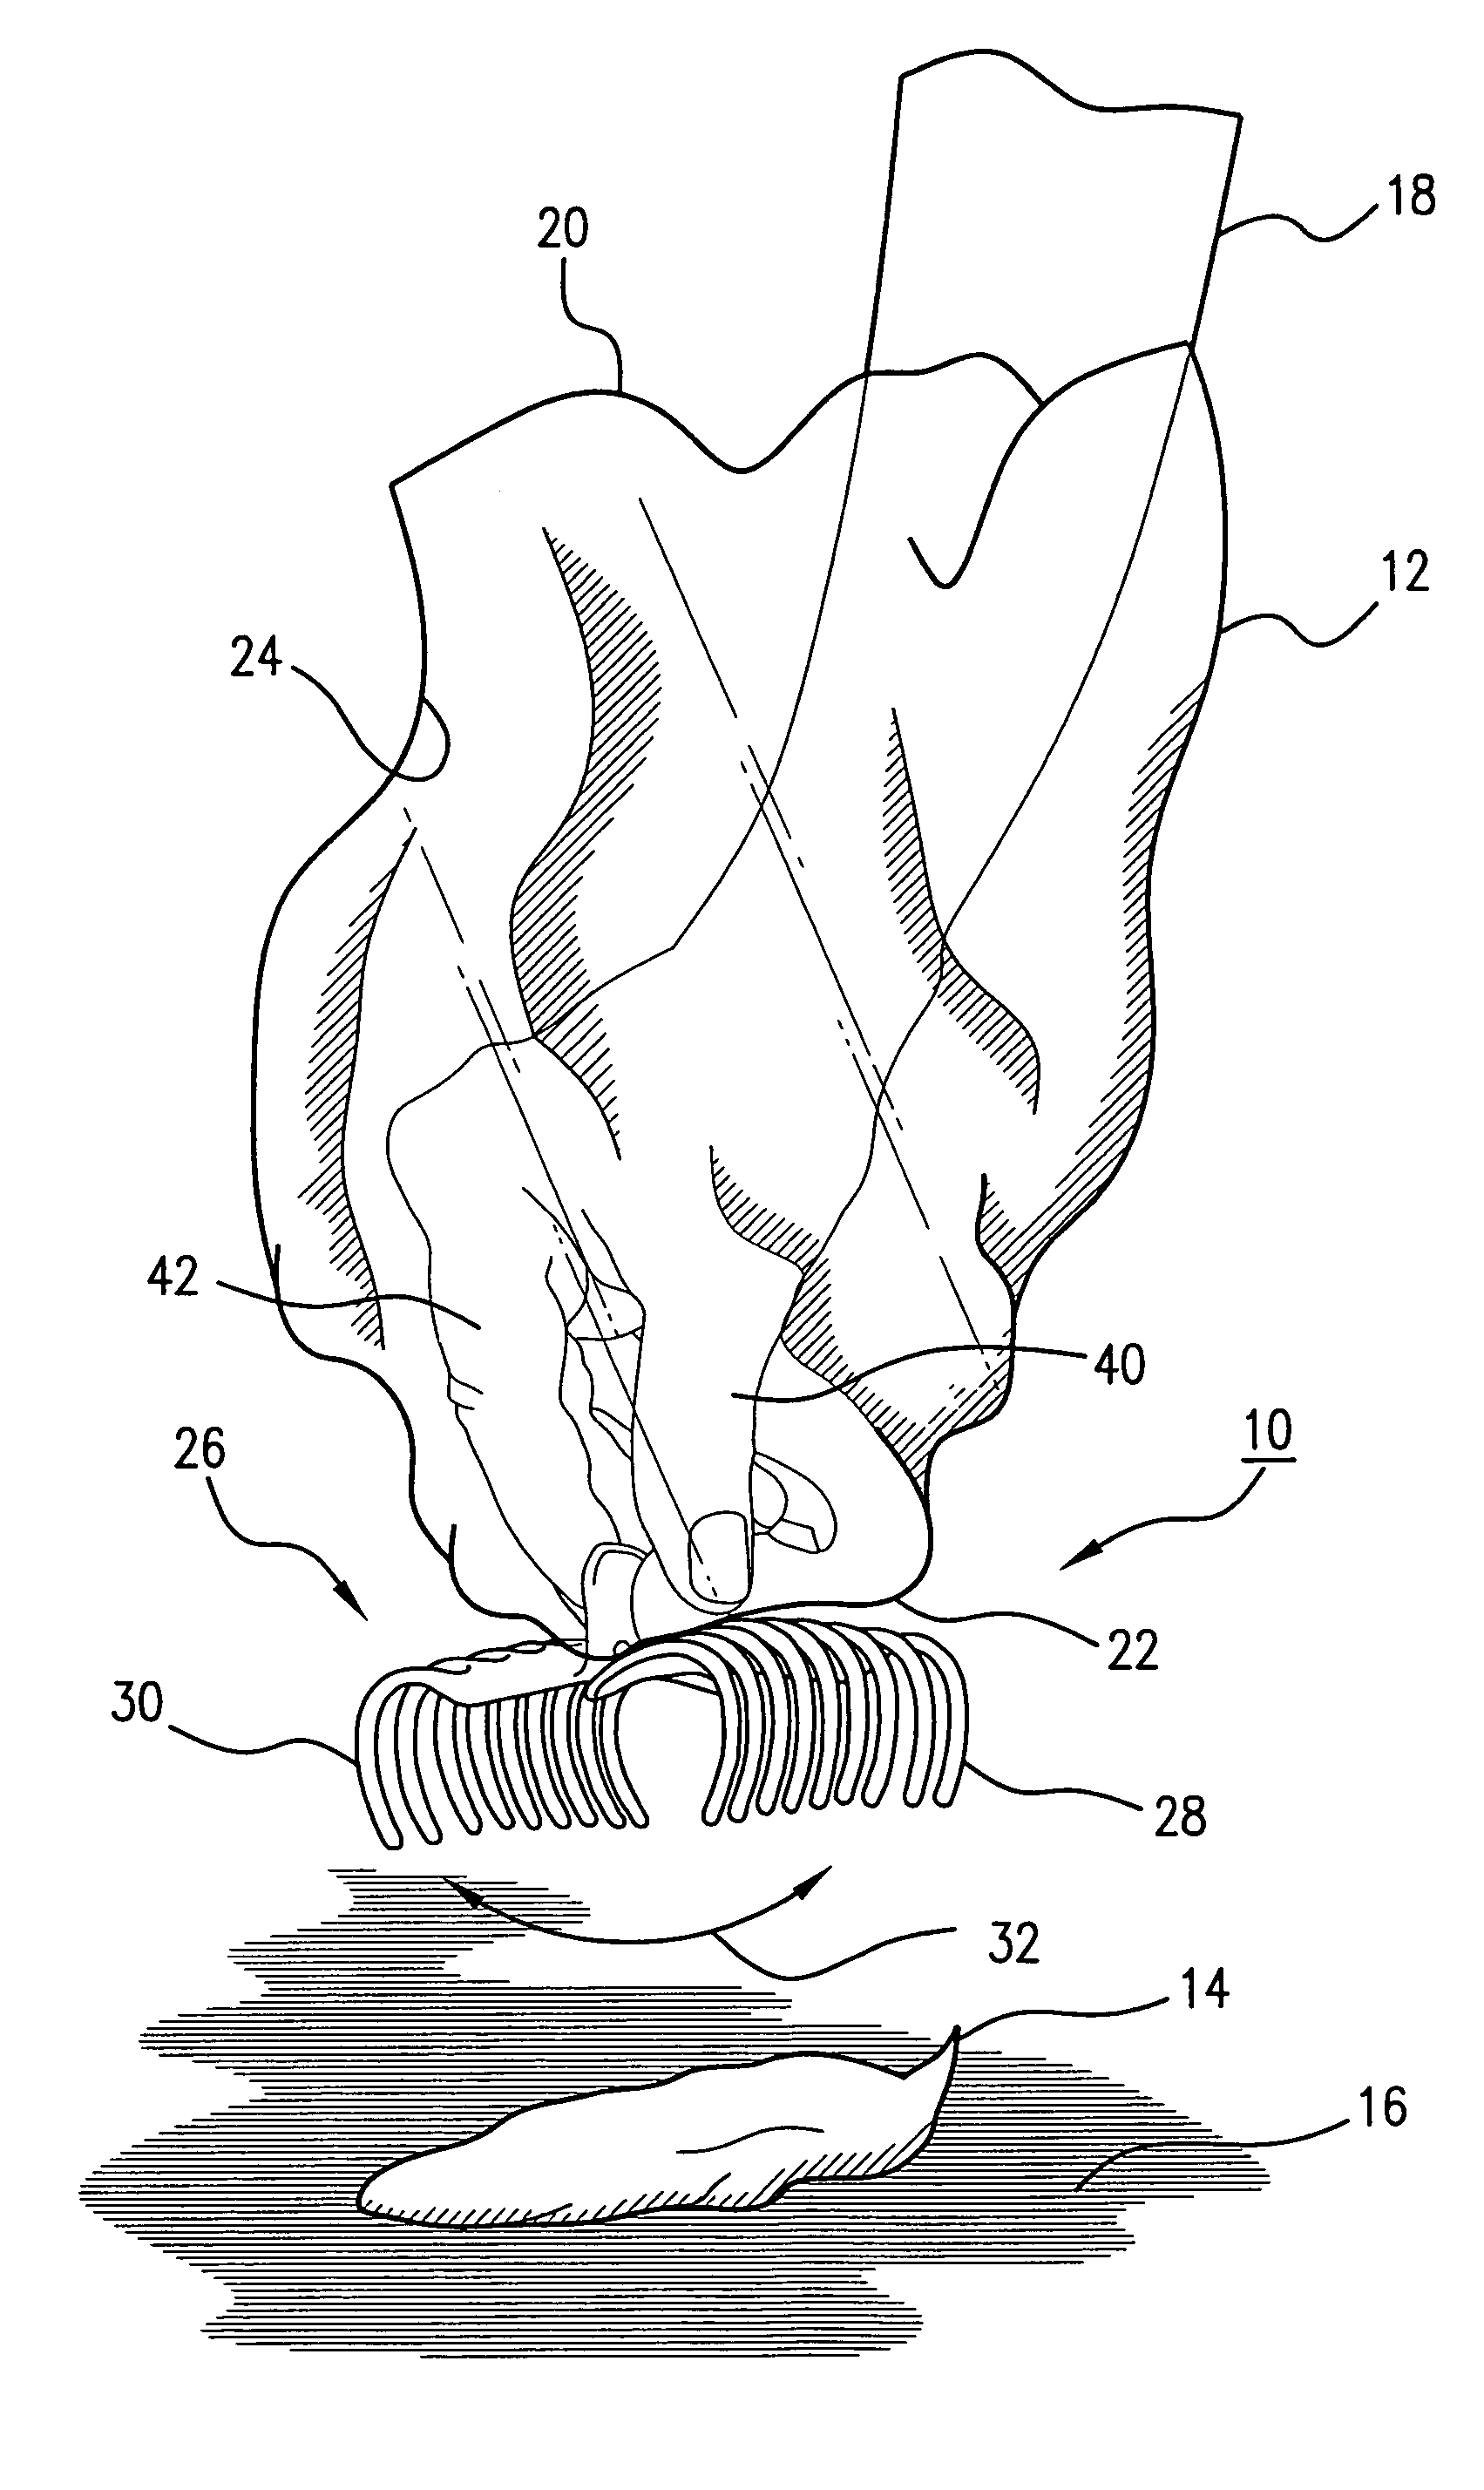 Refuse removal system and method for removing refuse